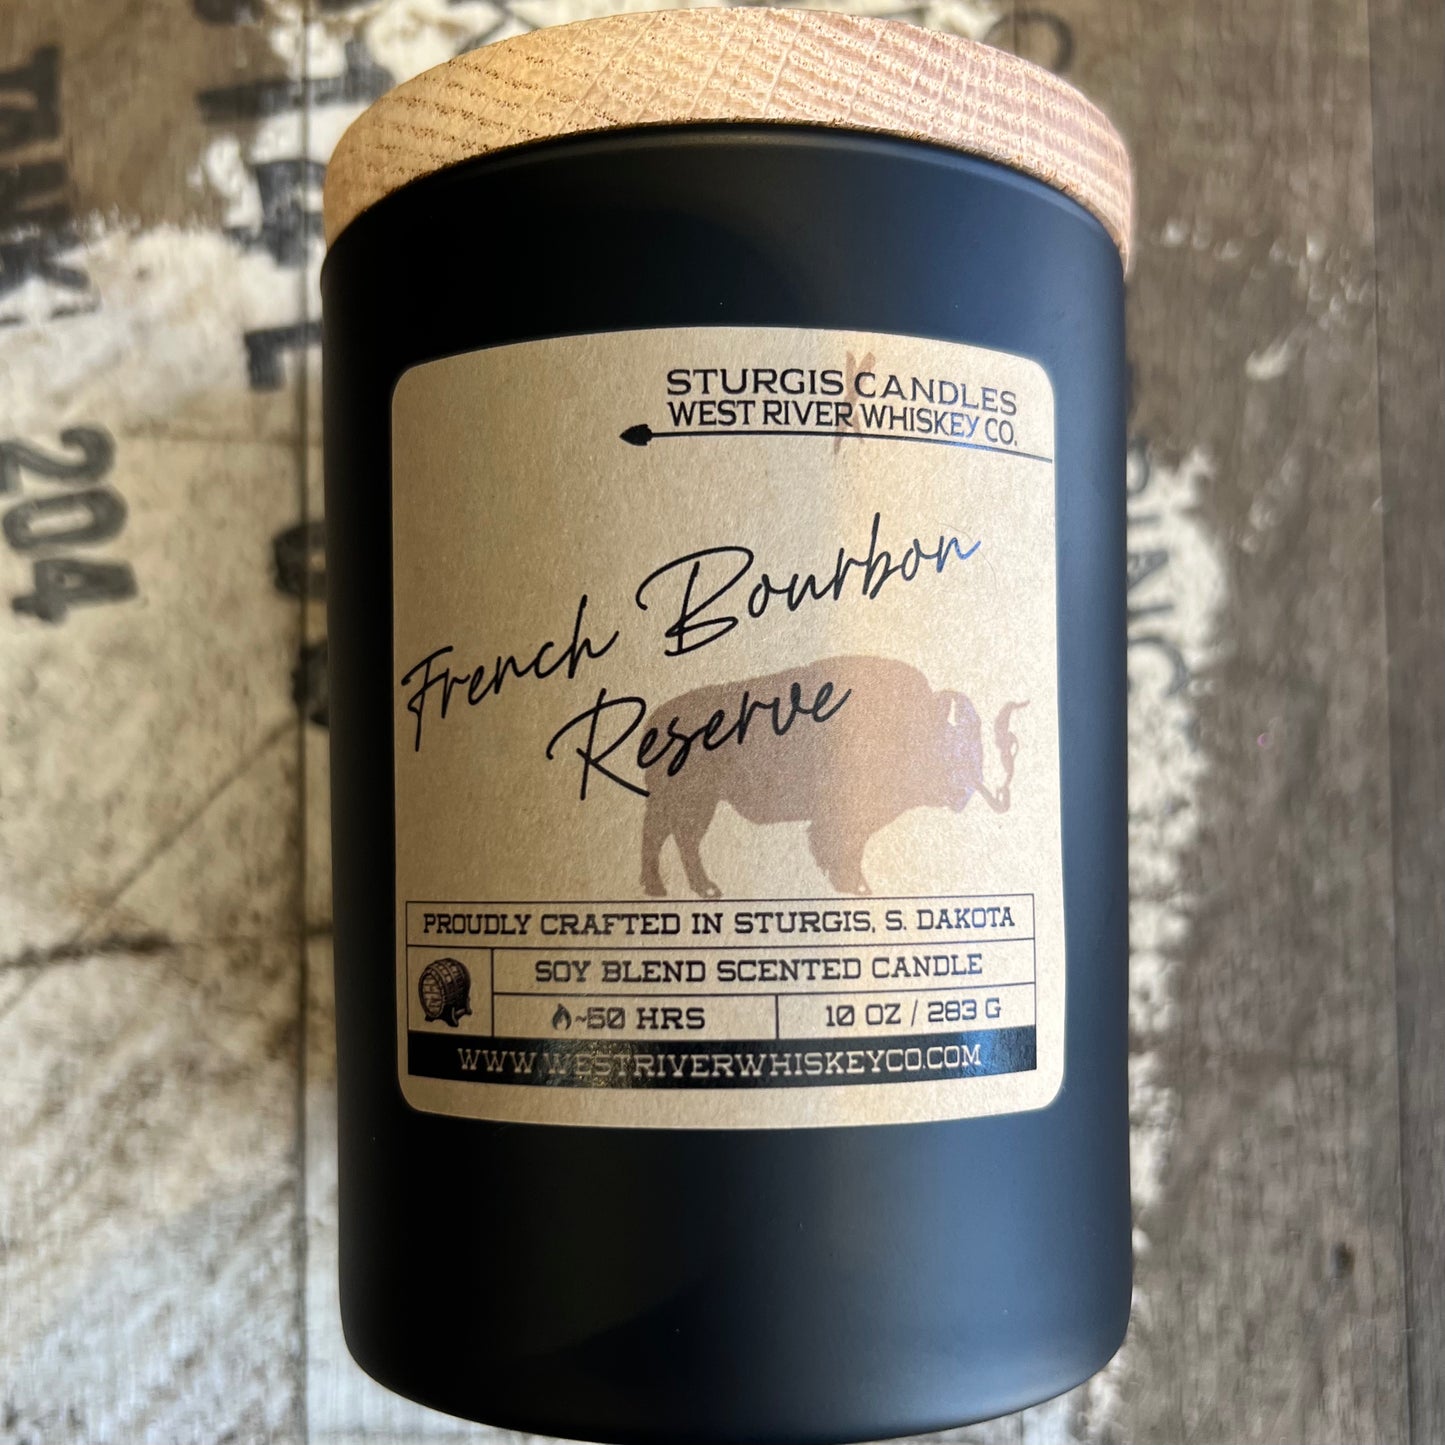 French Bourbon Reserve Candle